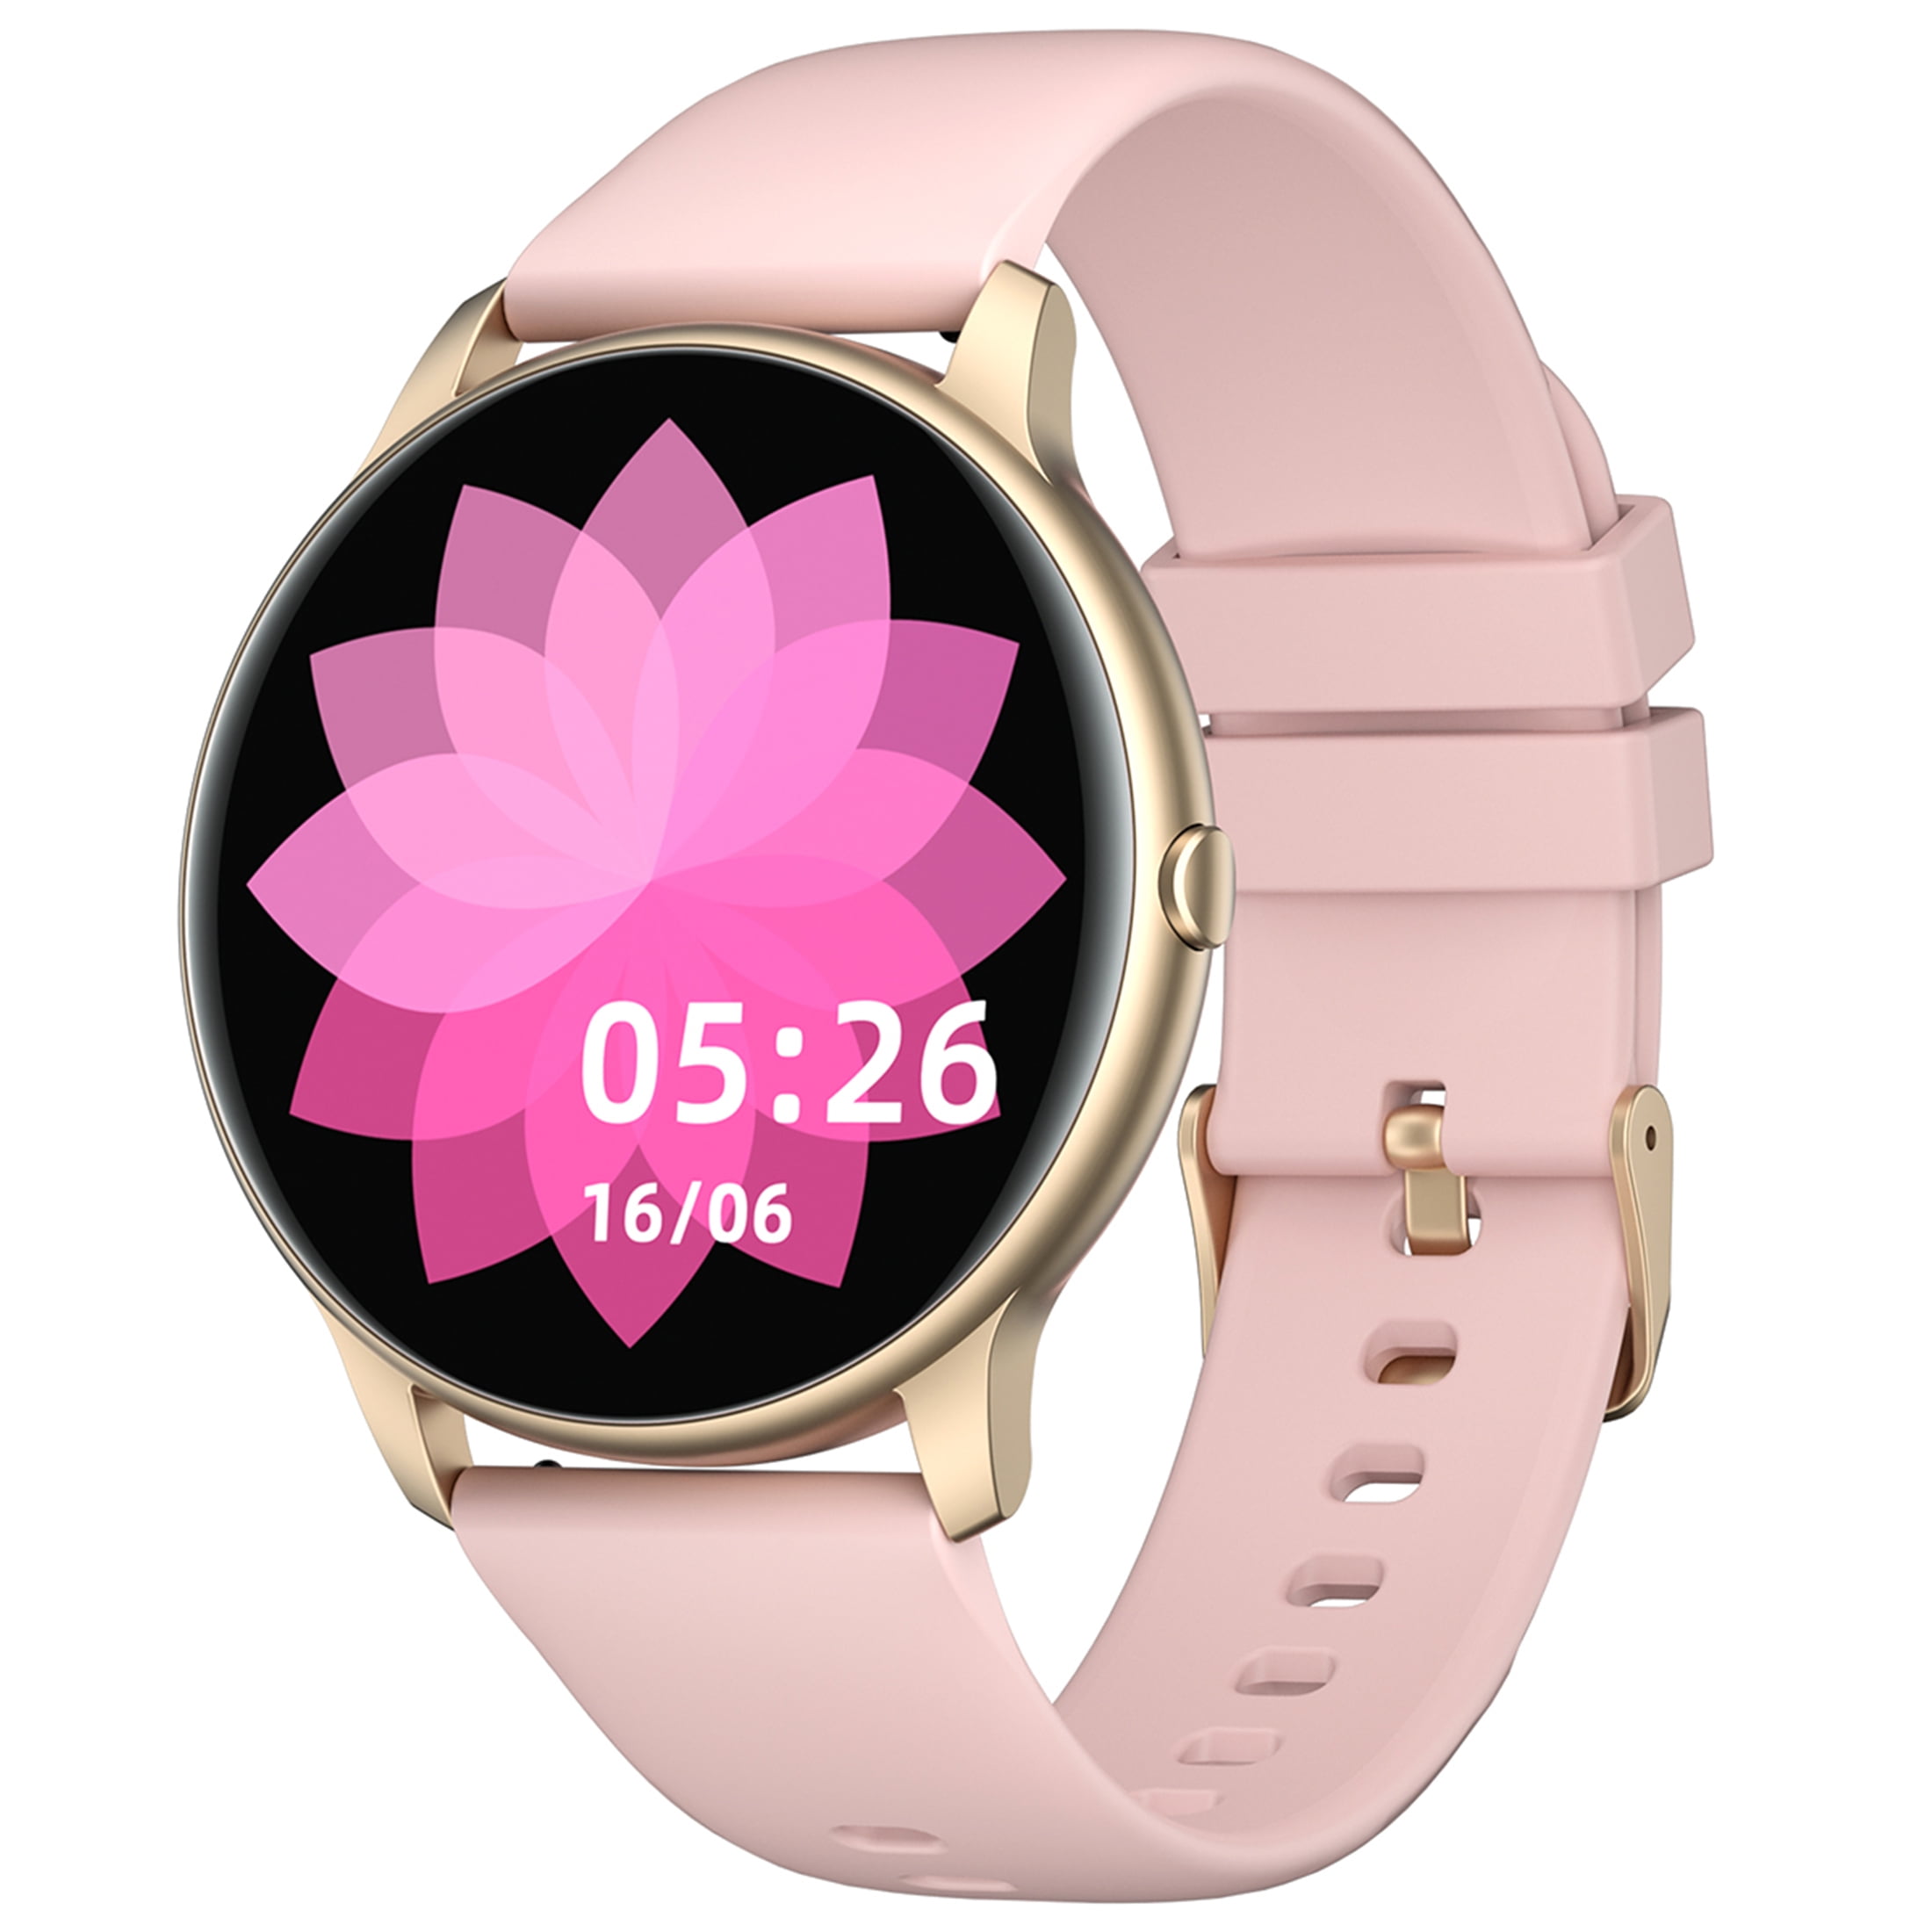 YAMAY Round Smart for Android Samsung iPhone, Fitness Tracker with Heart Rate Monitor Steps Sleep Tracker Customized Watch Face IP68 Waterproof Smartwatch for Women Pink - Walmart.com